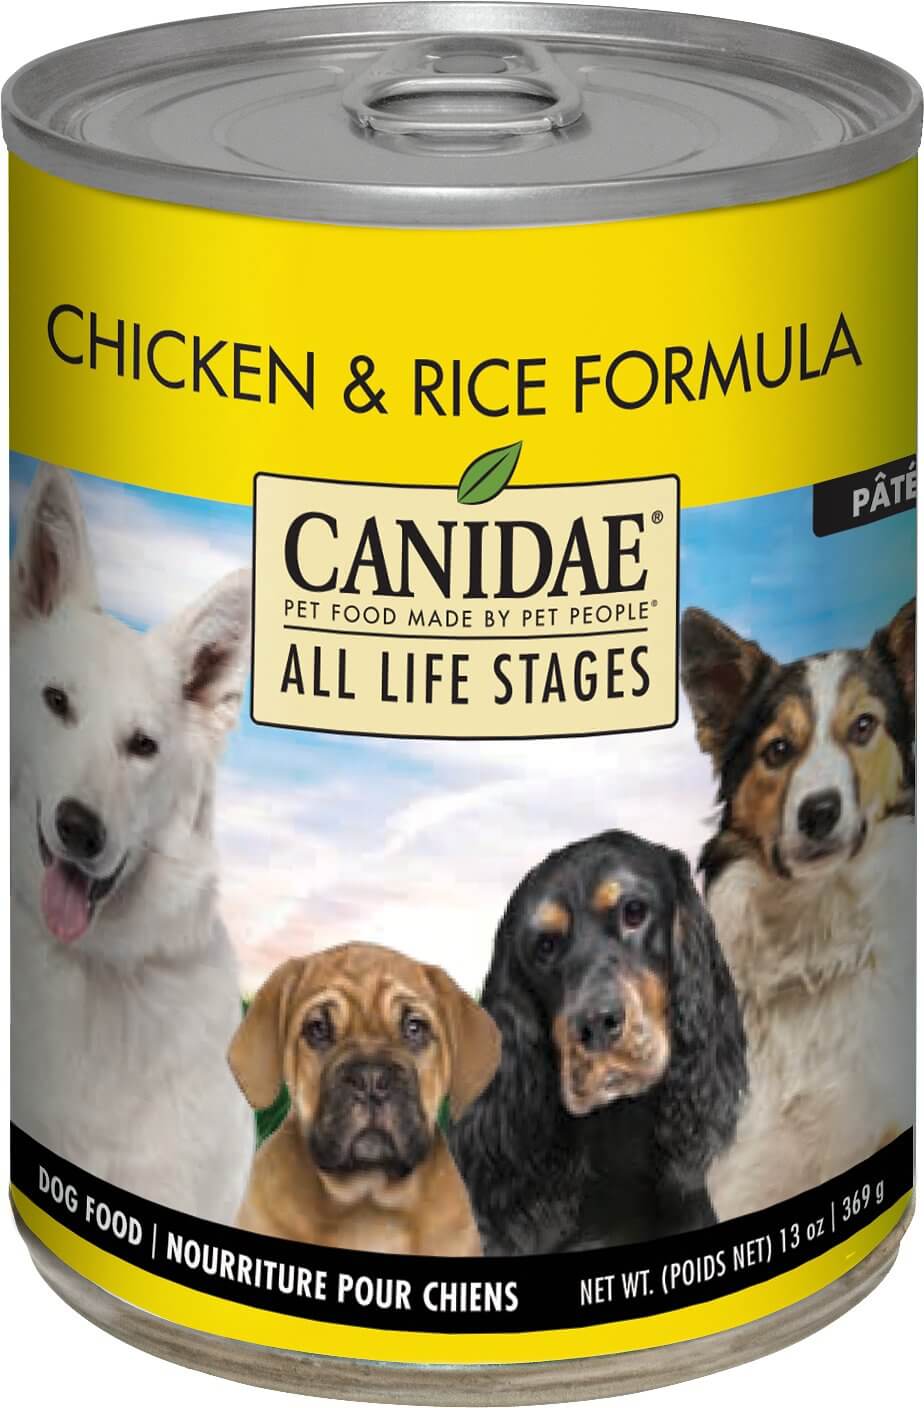 Canidae All Life Stages Canned Dog Food Review Rating Recalls